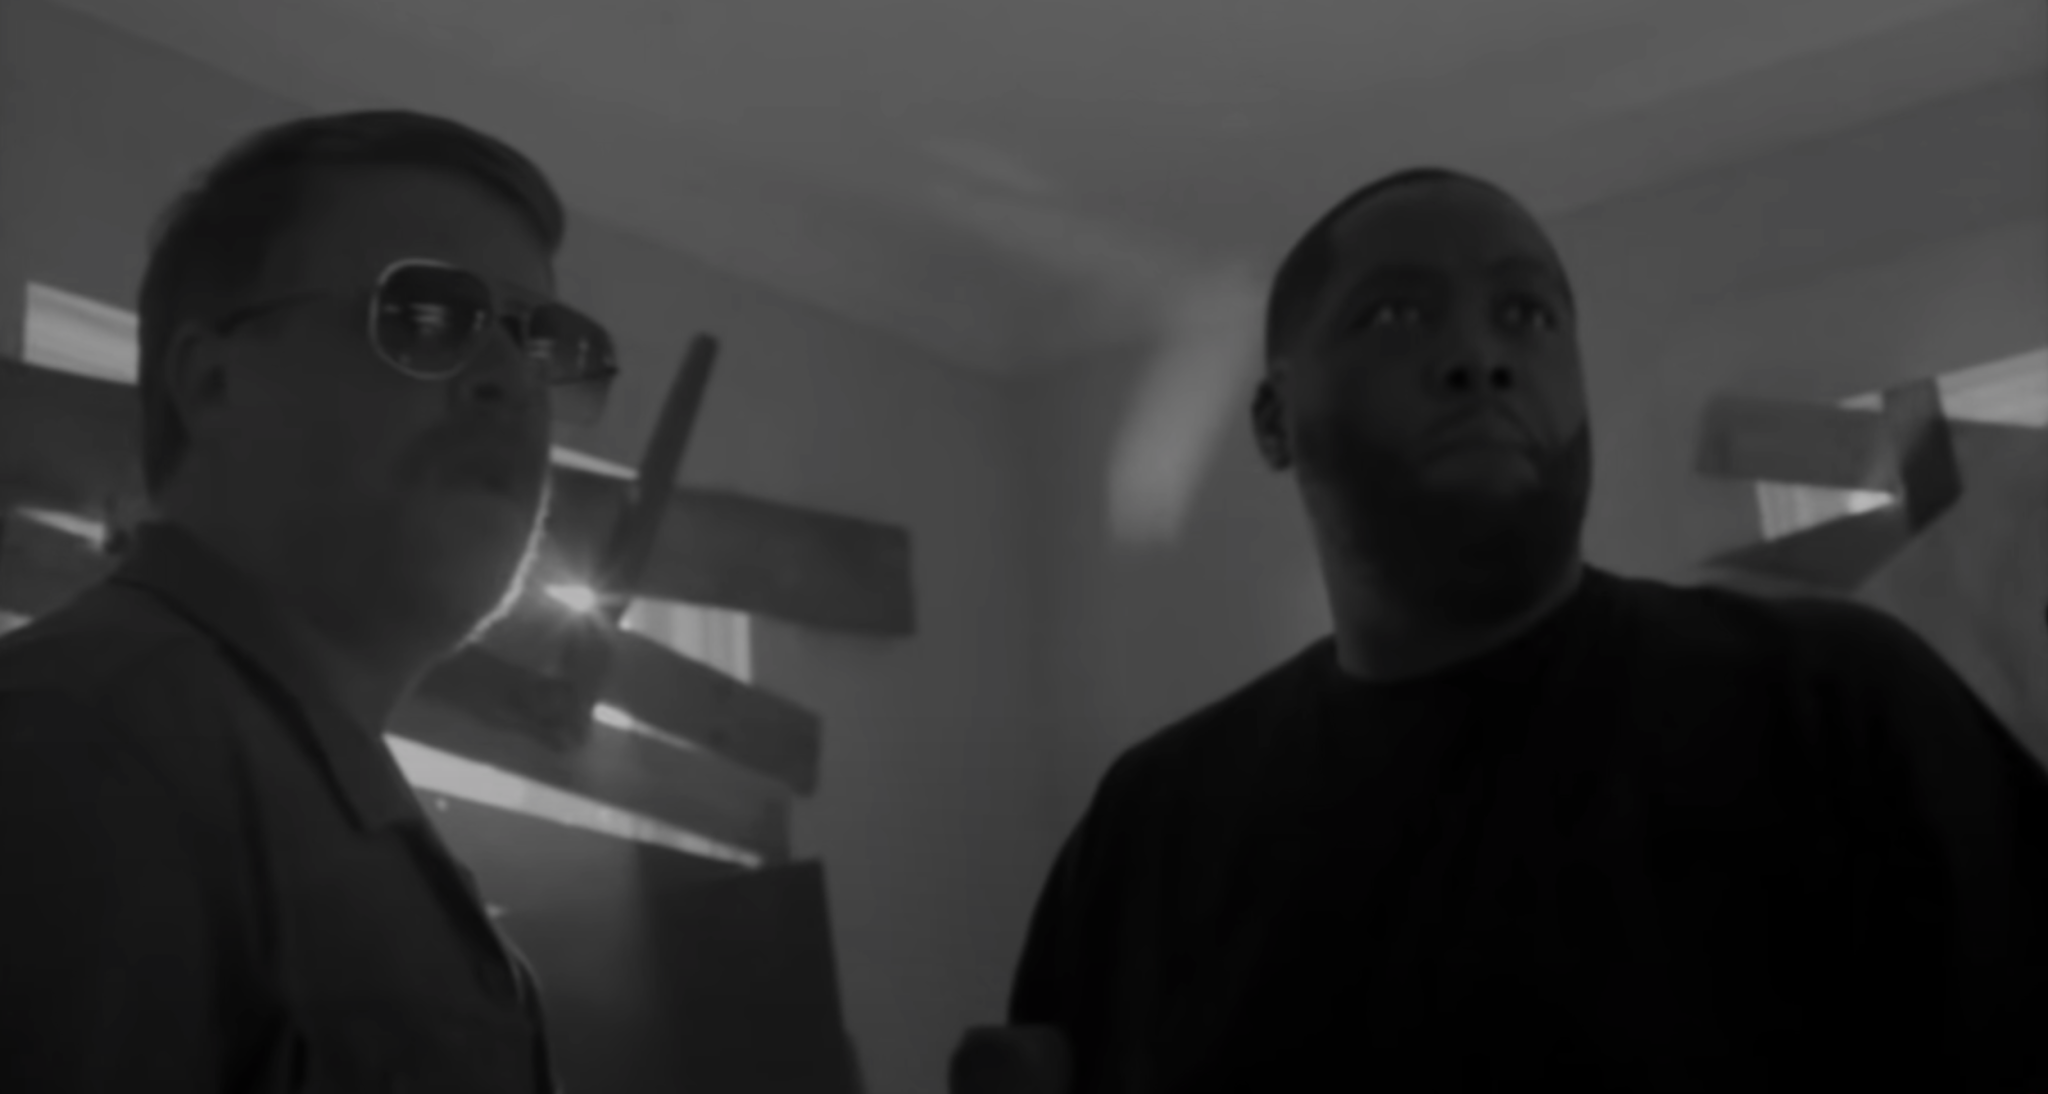 Artist of the Year: Run the Jewels